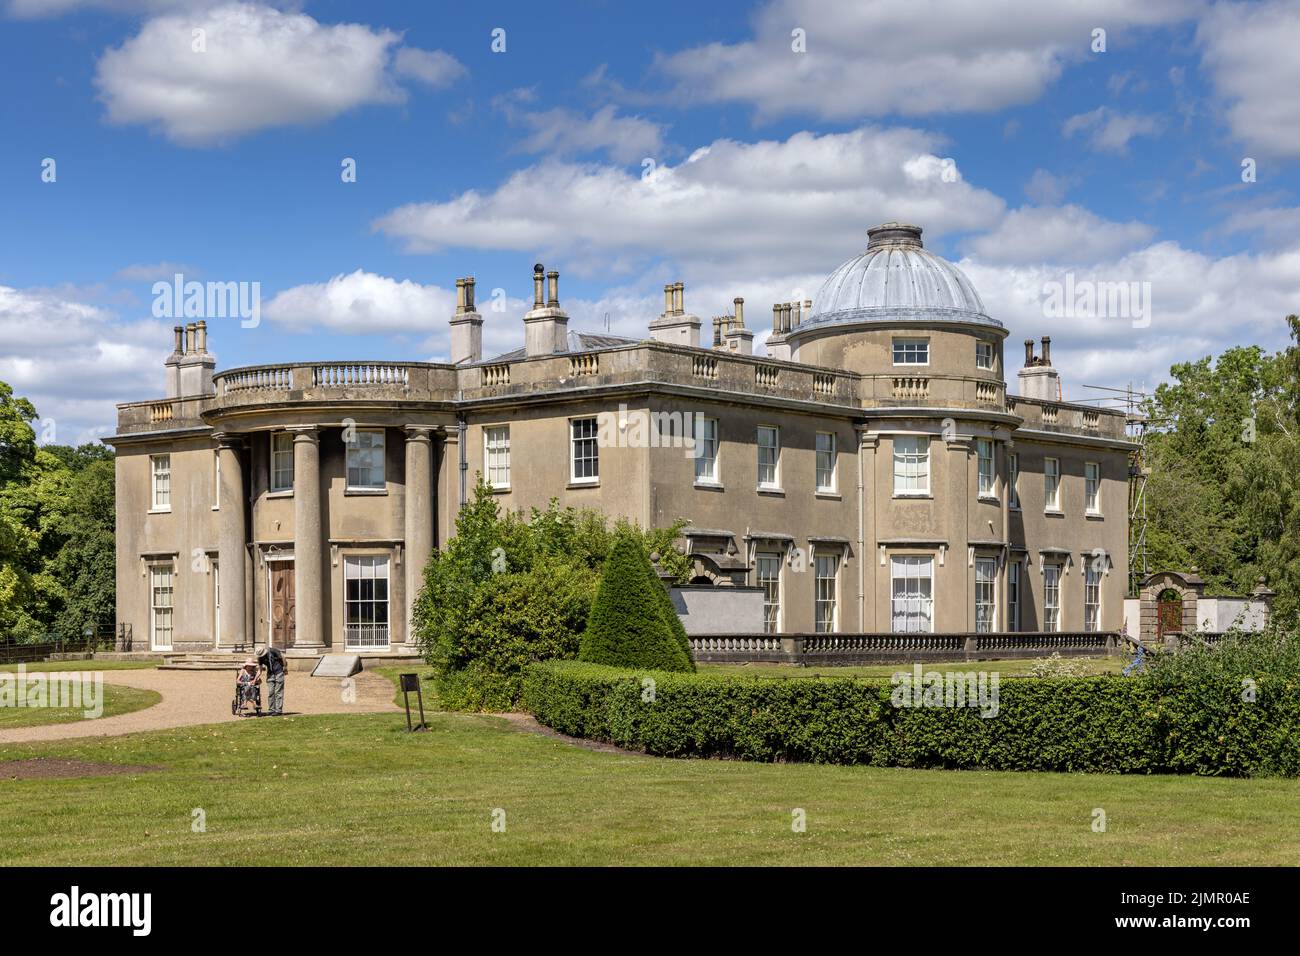 Scampston Hall, one of the finest regency country houses in North Yorkshire, England. Stock Photo